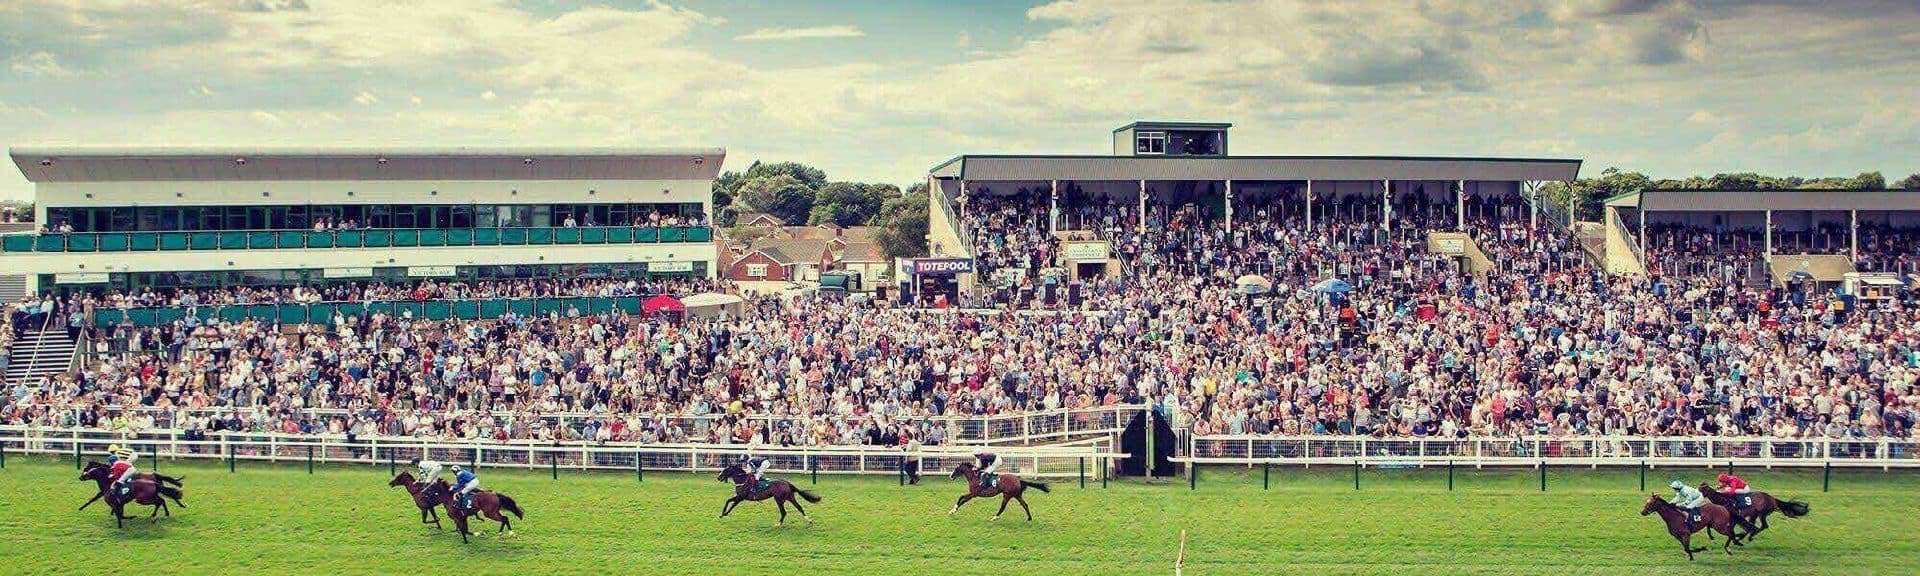 Great Yarmouth Racecourse in UK